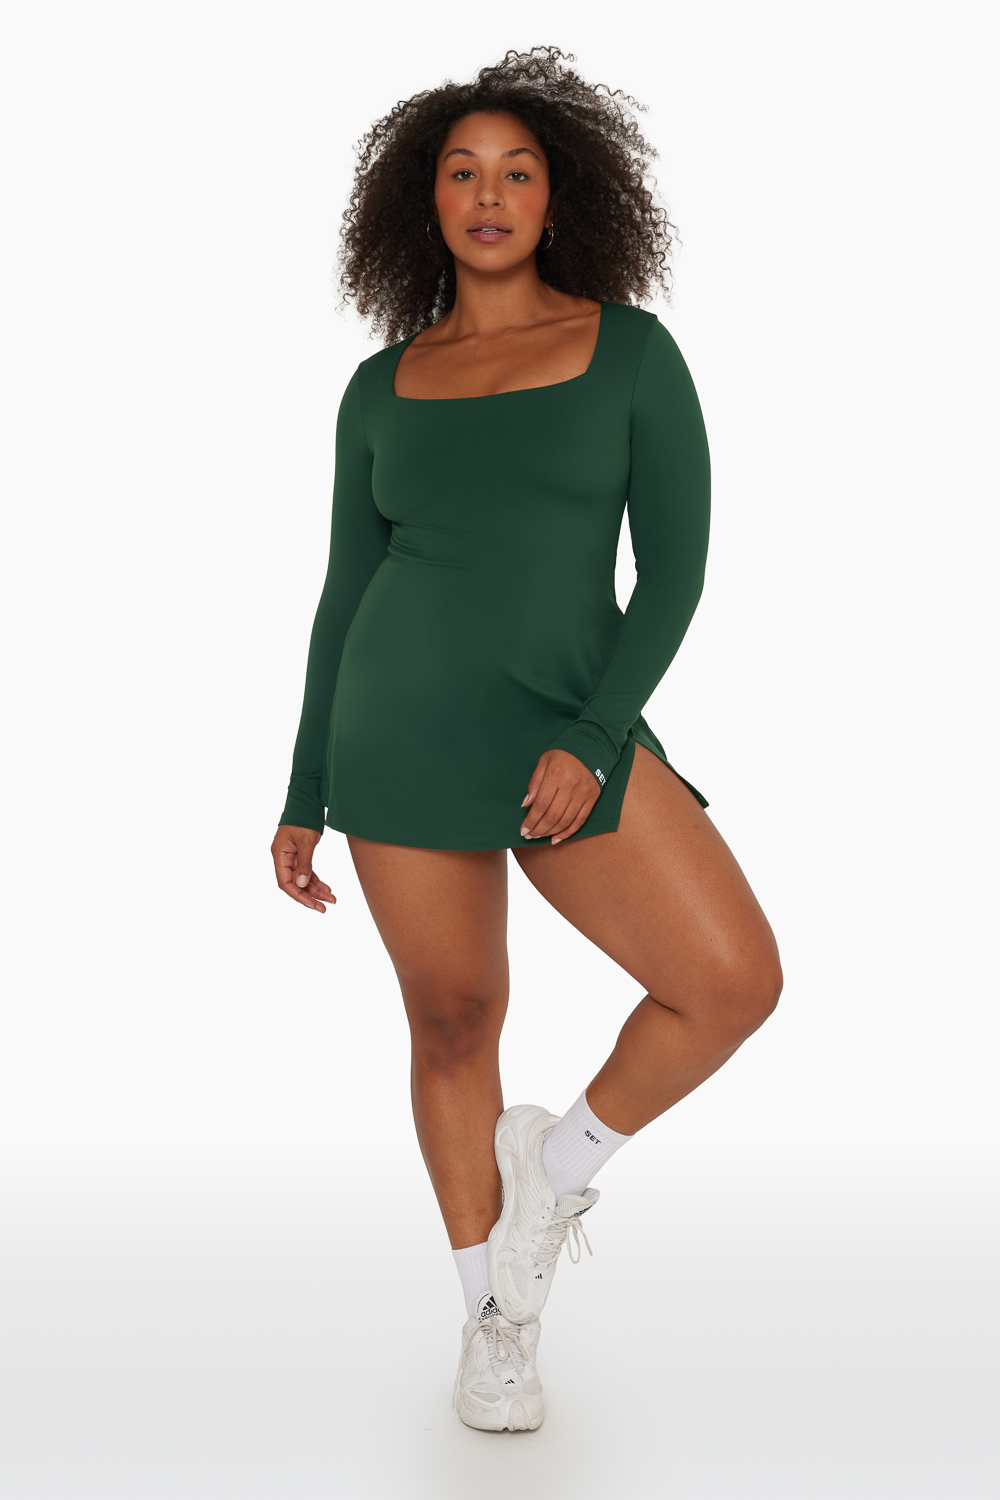 SET™ SPORTBODY® CROSSOVER DRESS IN SYCAMORE